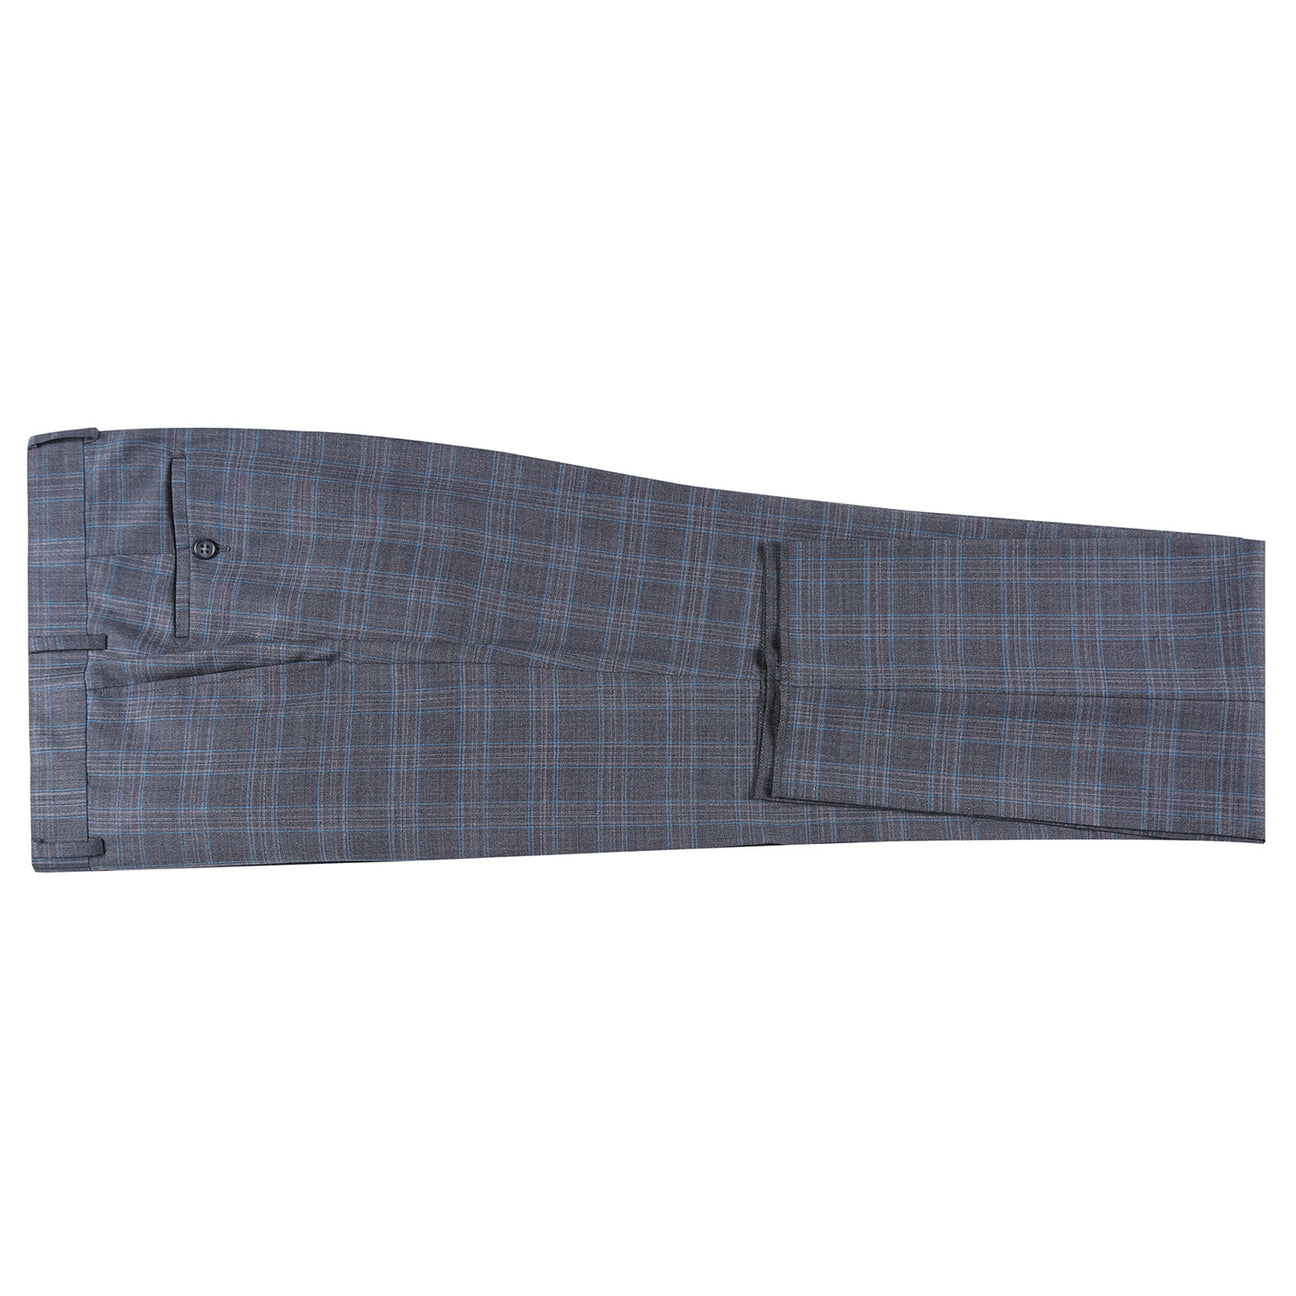 ENGLISH LAUNDRY Wool Gray Checked Peak Suit 62-68-095